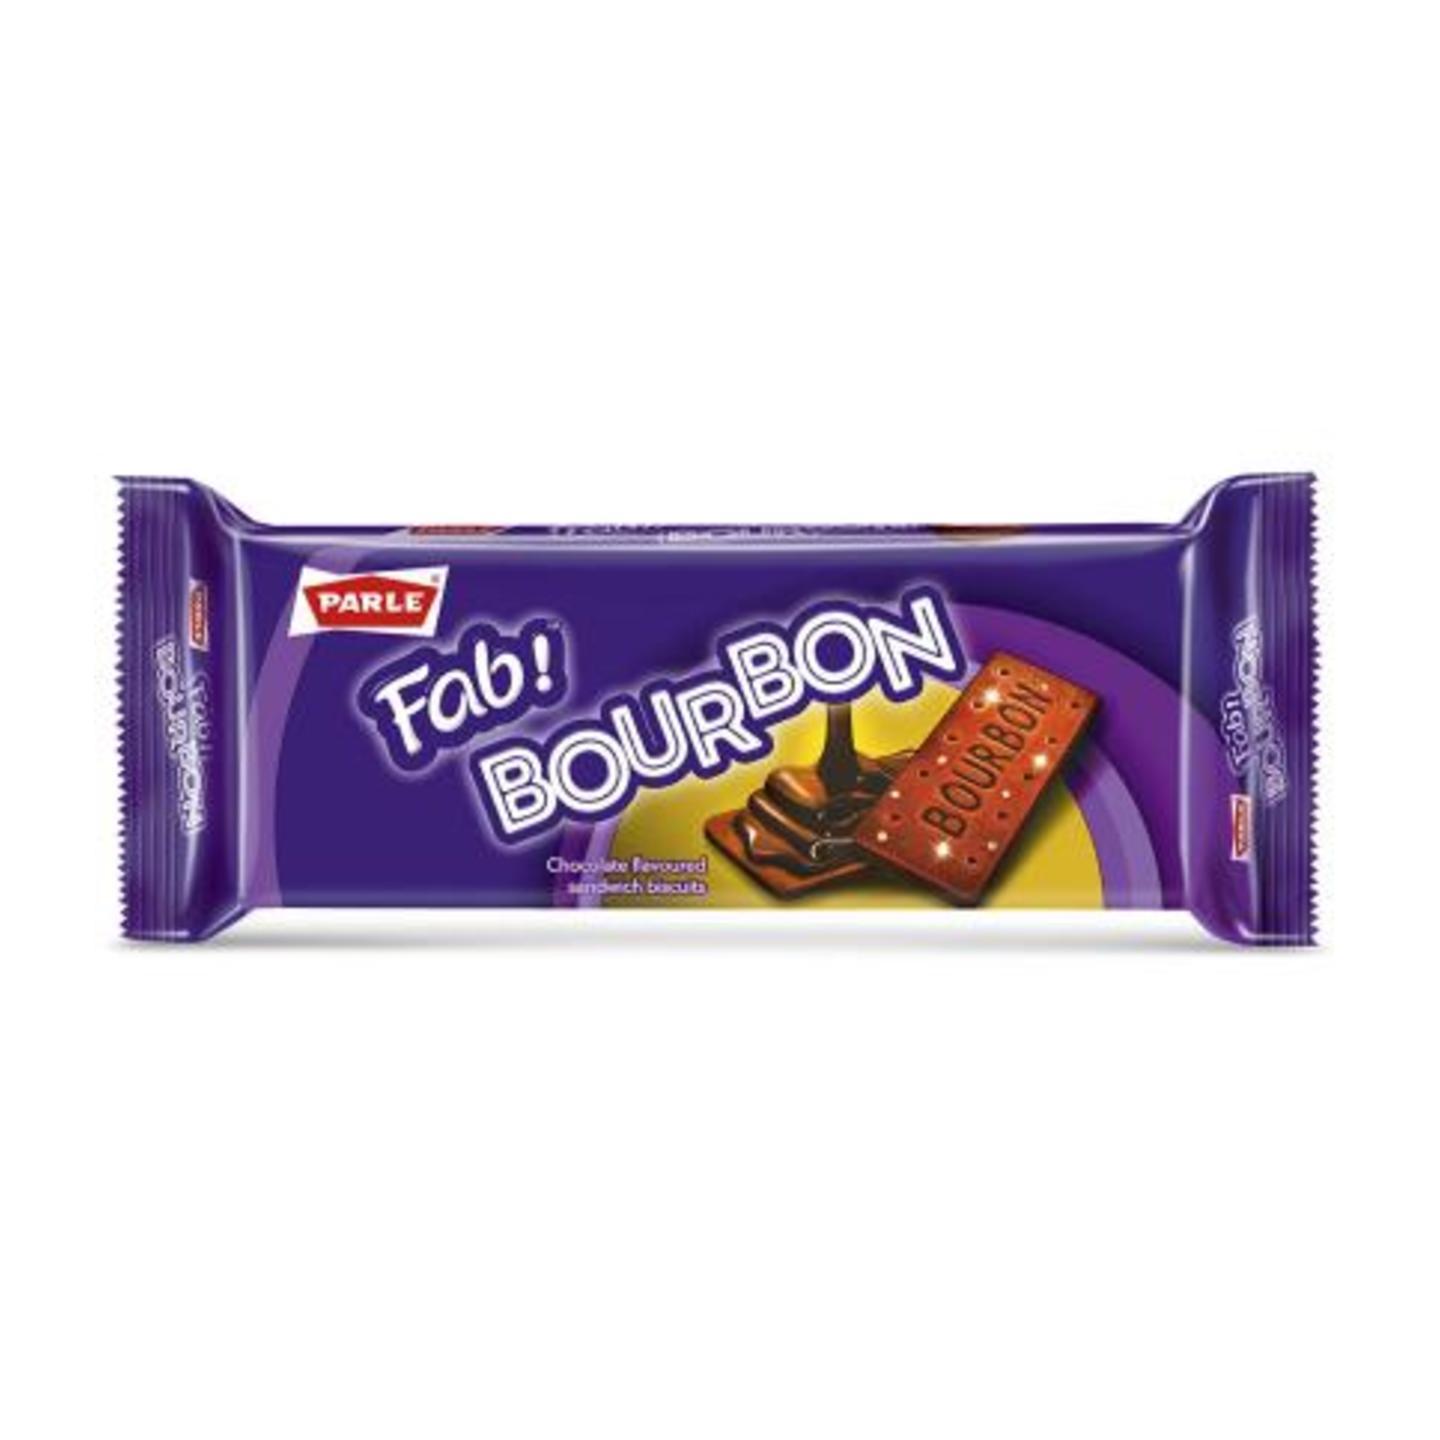 Parle Fab Bourbon Chocolate Cream Biscuits 150 g